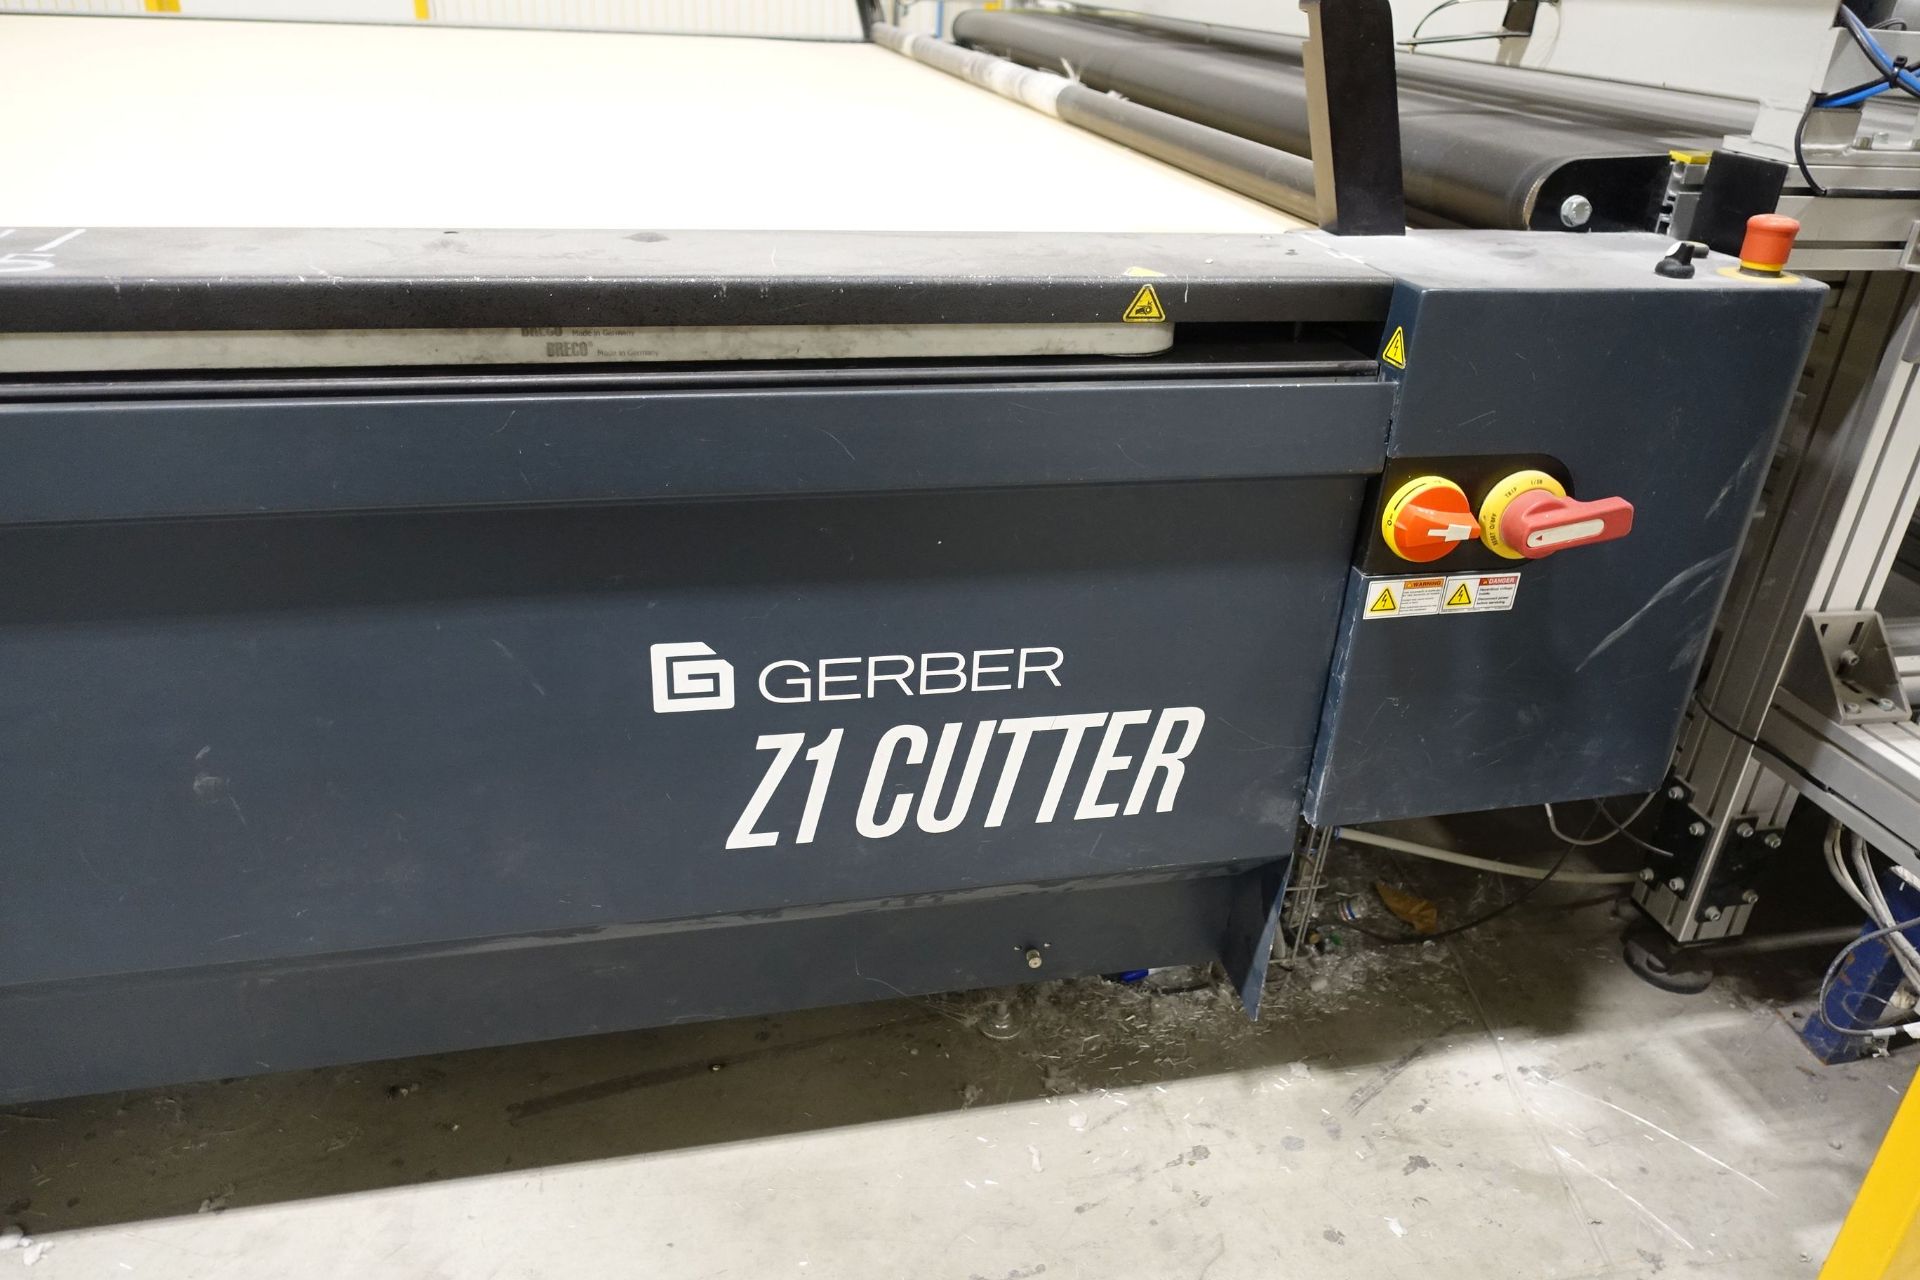 GERBER 'Z1 CUTTER' Materials Dry Cutting Machine, 6-Roll Feed Stand, CC Sistemas '282' Feeder - Image 33 of 39